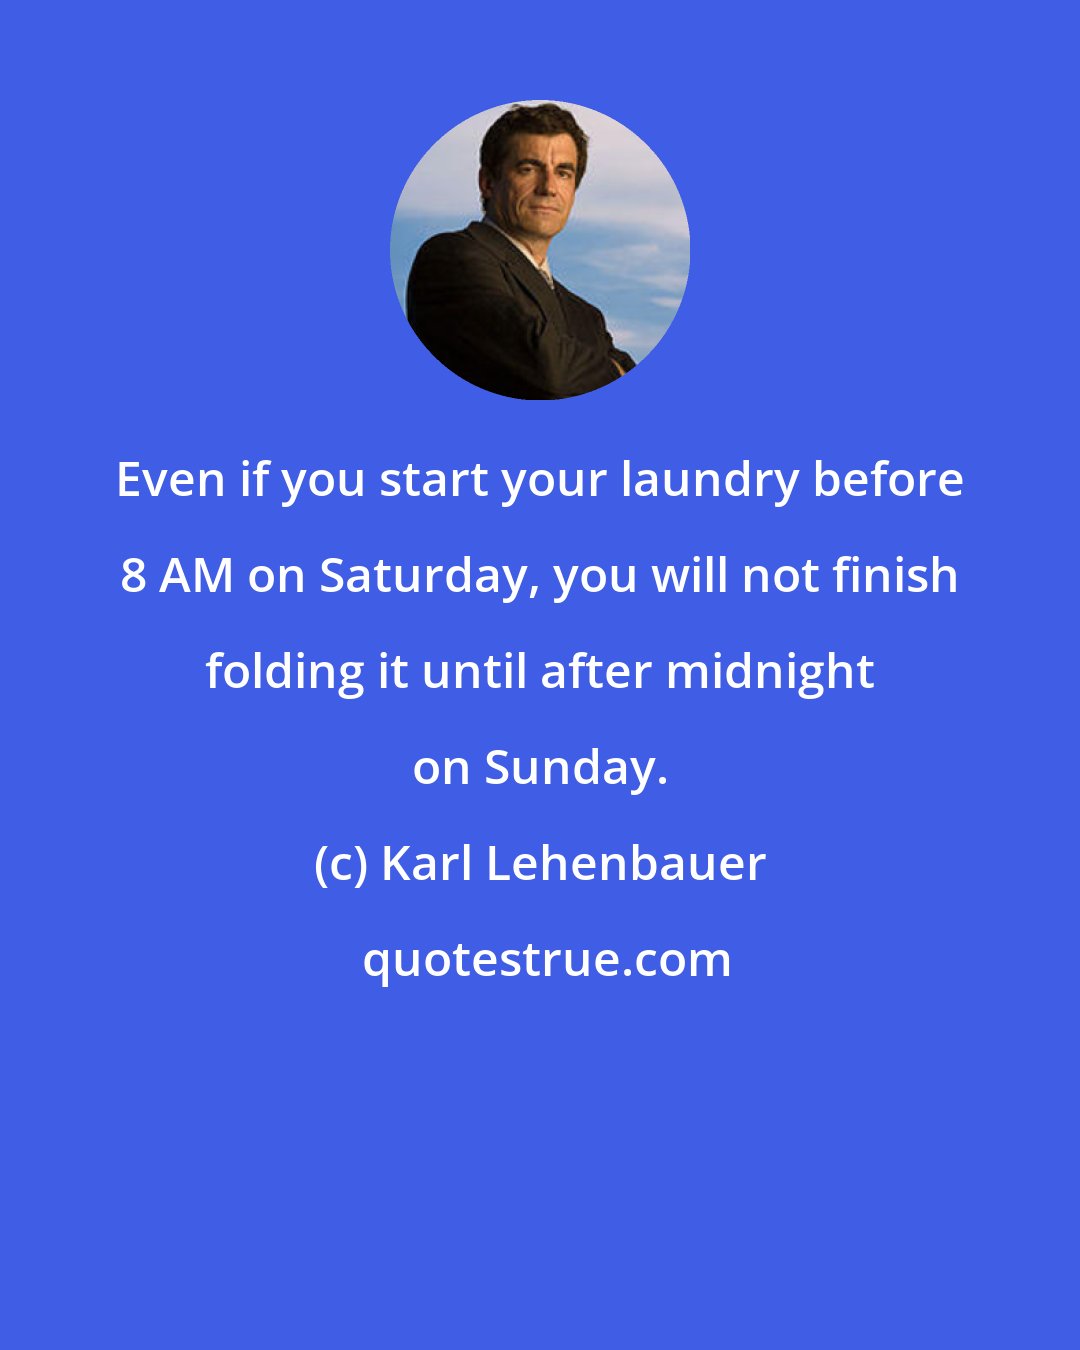 Karl Lehenbauer: Even if you start your laundry before 8 AM on Saturday, you will not finish folding it until after midnight on Sunday.